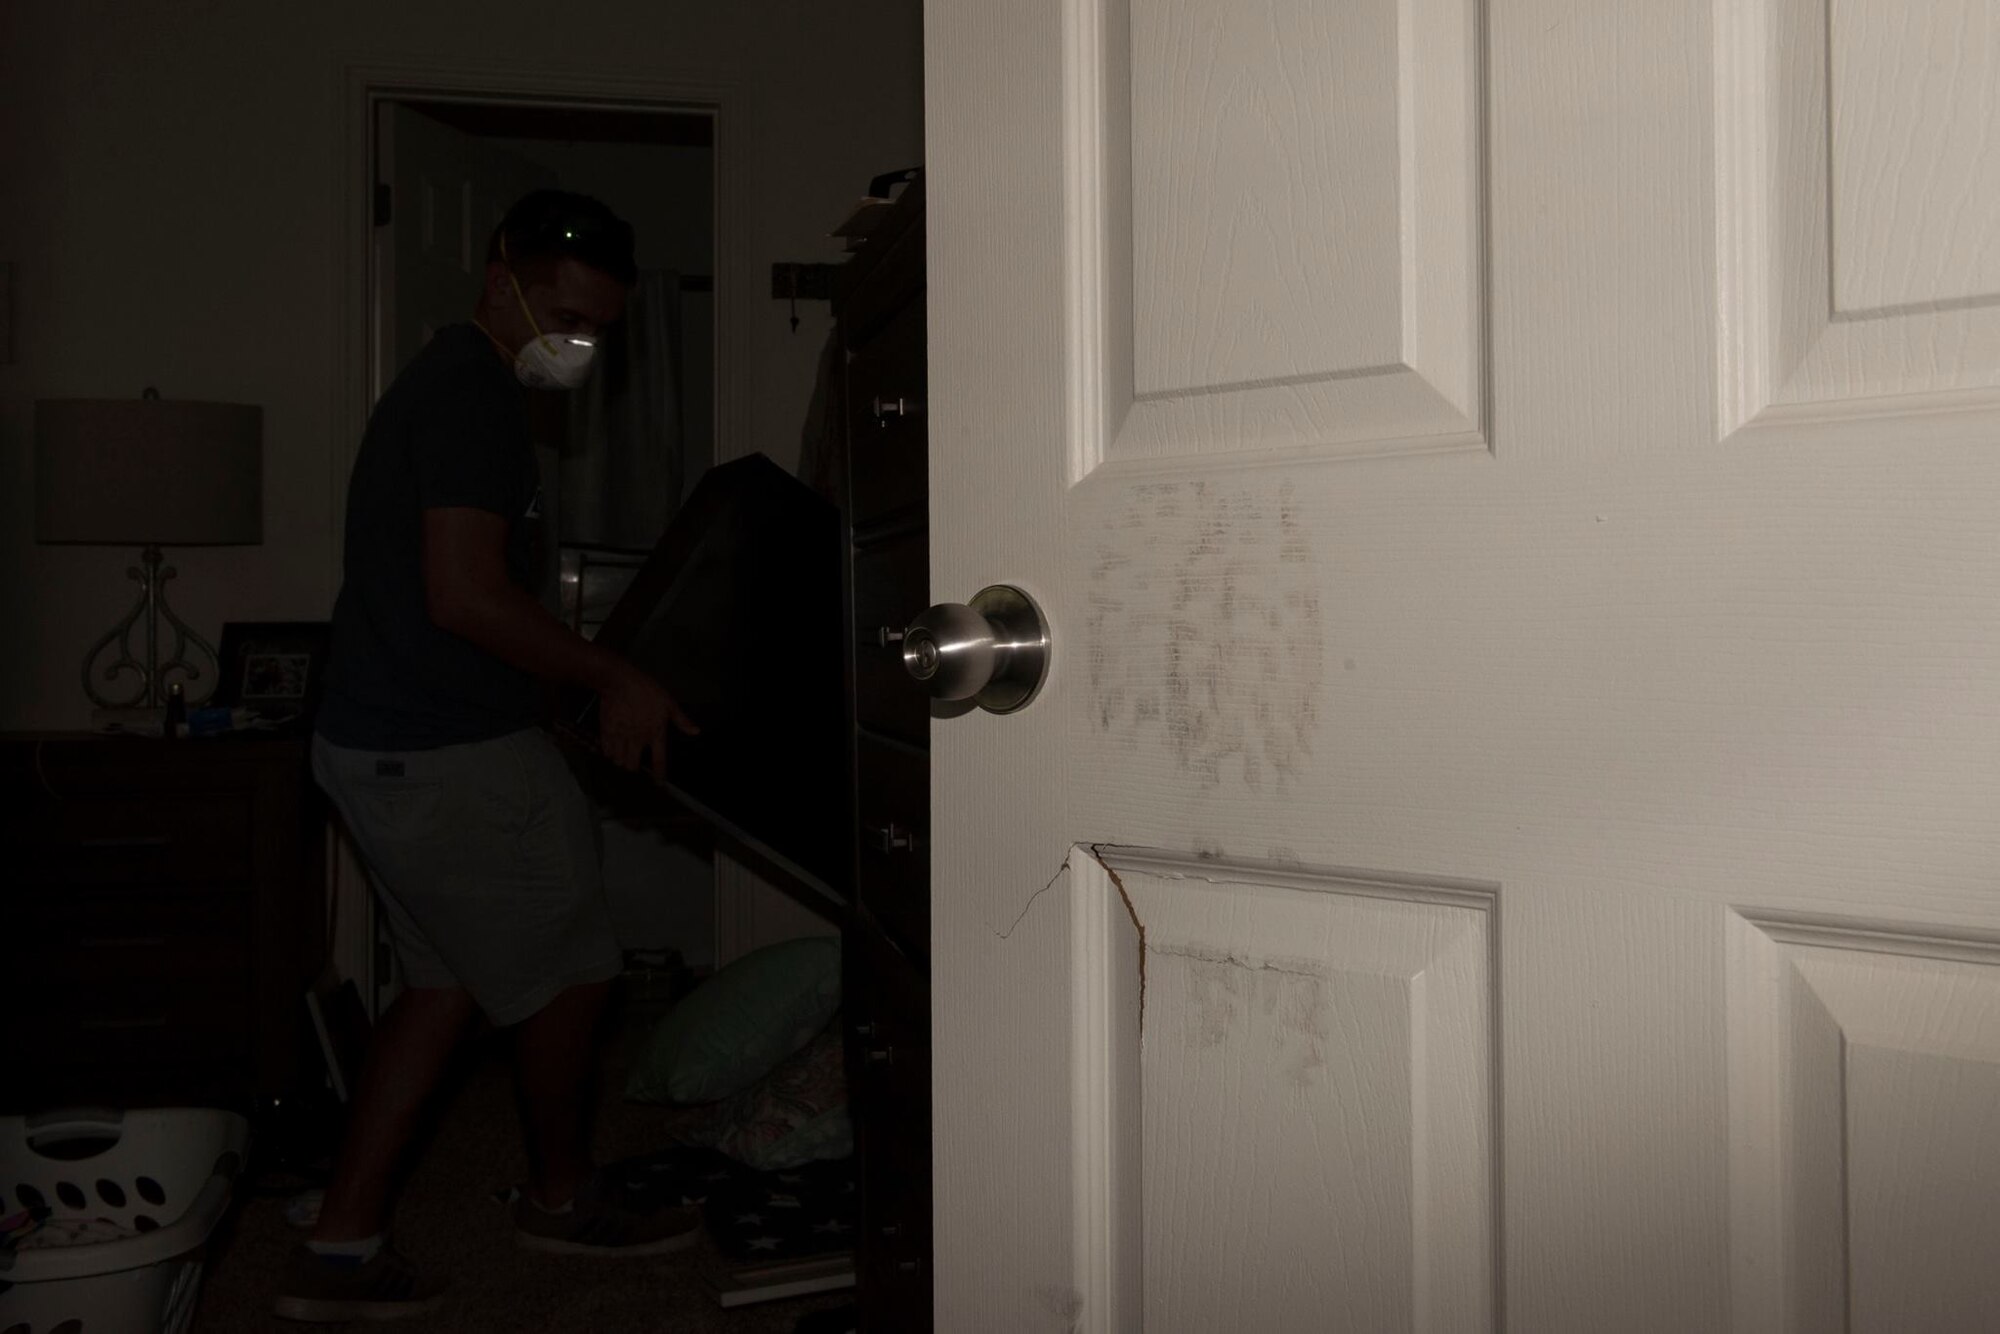 The Kriete's have help from a friend moving things out of their bedroom after having to kick open their bedroom door, at Tyndall Air Force Base, Fla., Oct. 19, 2018. Tyndall AFB was damaged by Hurricane Michael which displaced approximately 11,000 people, to include the Kriete family who travelled back to Tyndall during a five hour window to recover their belongings.